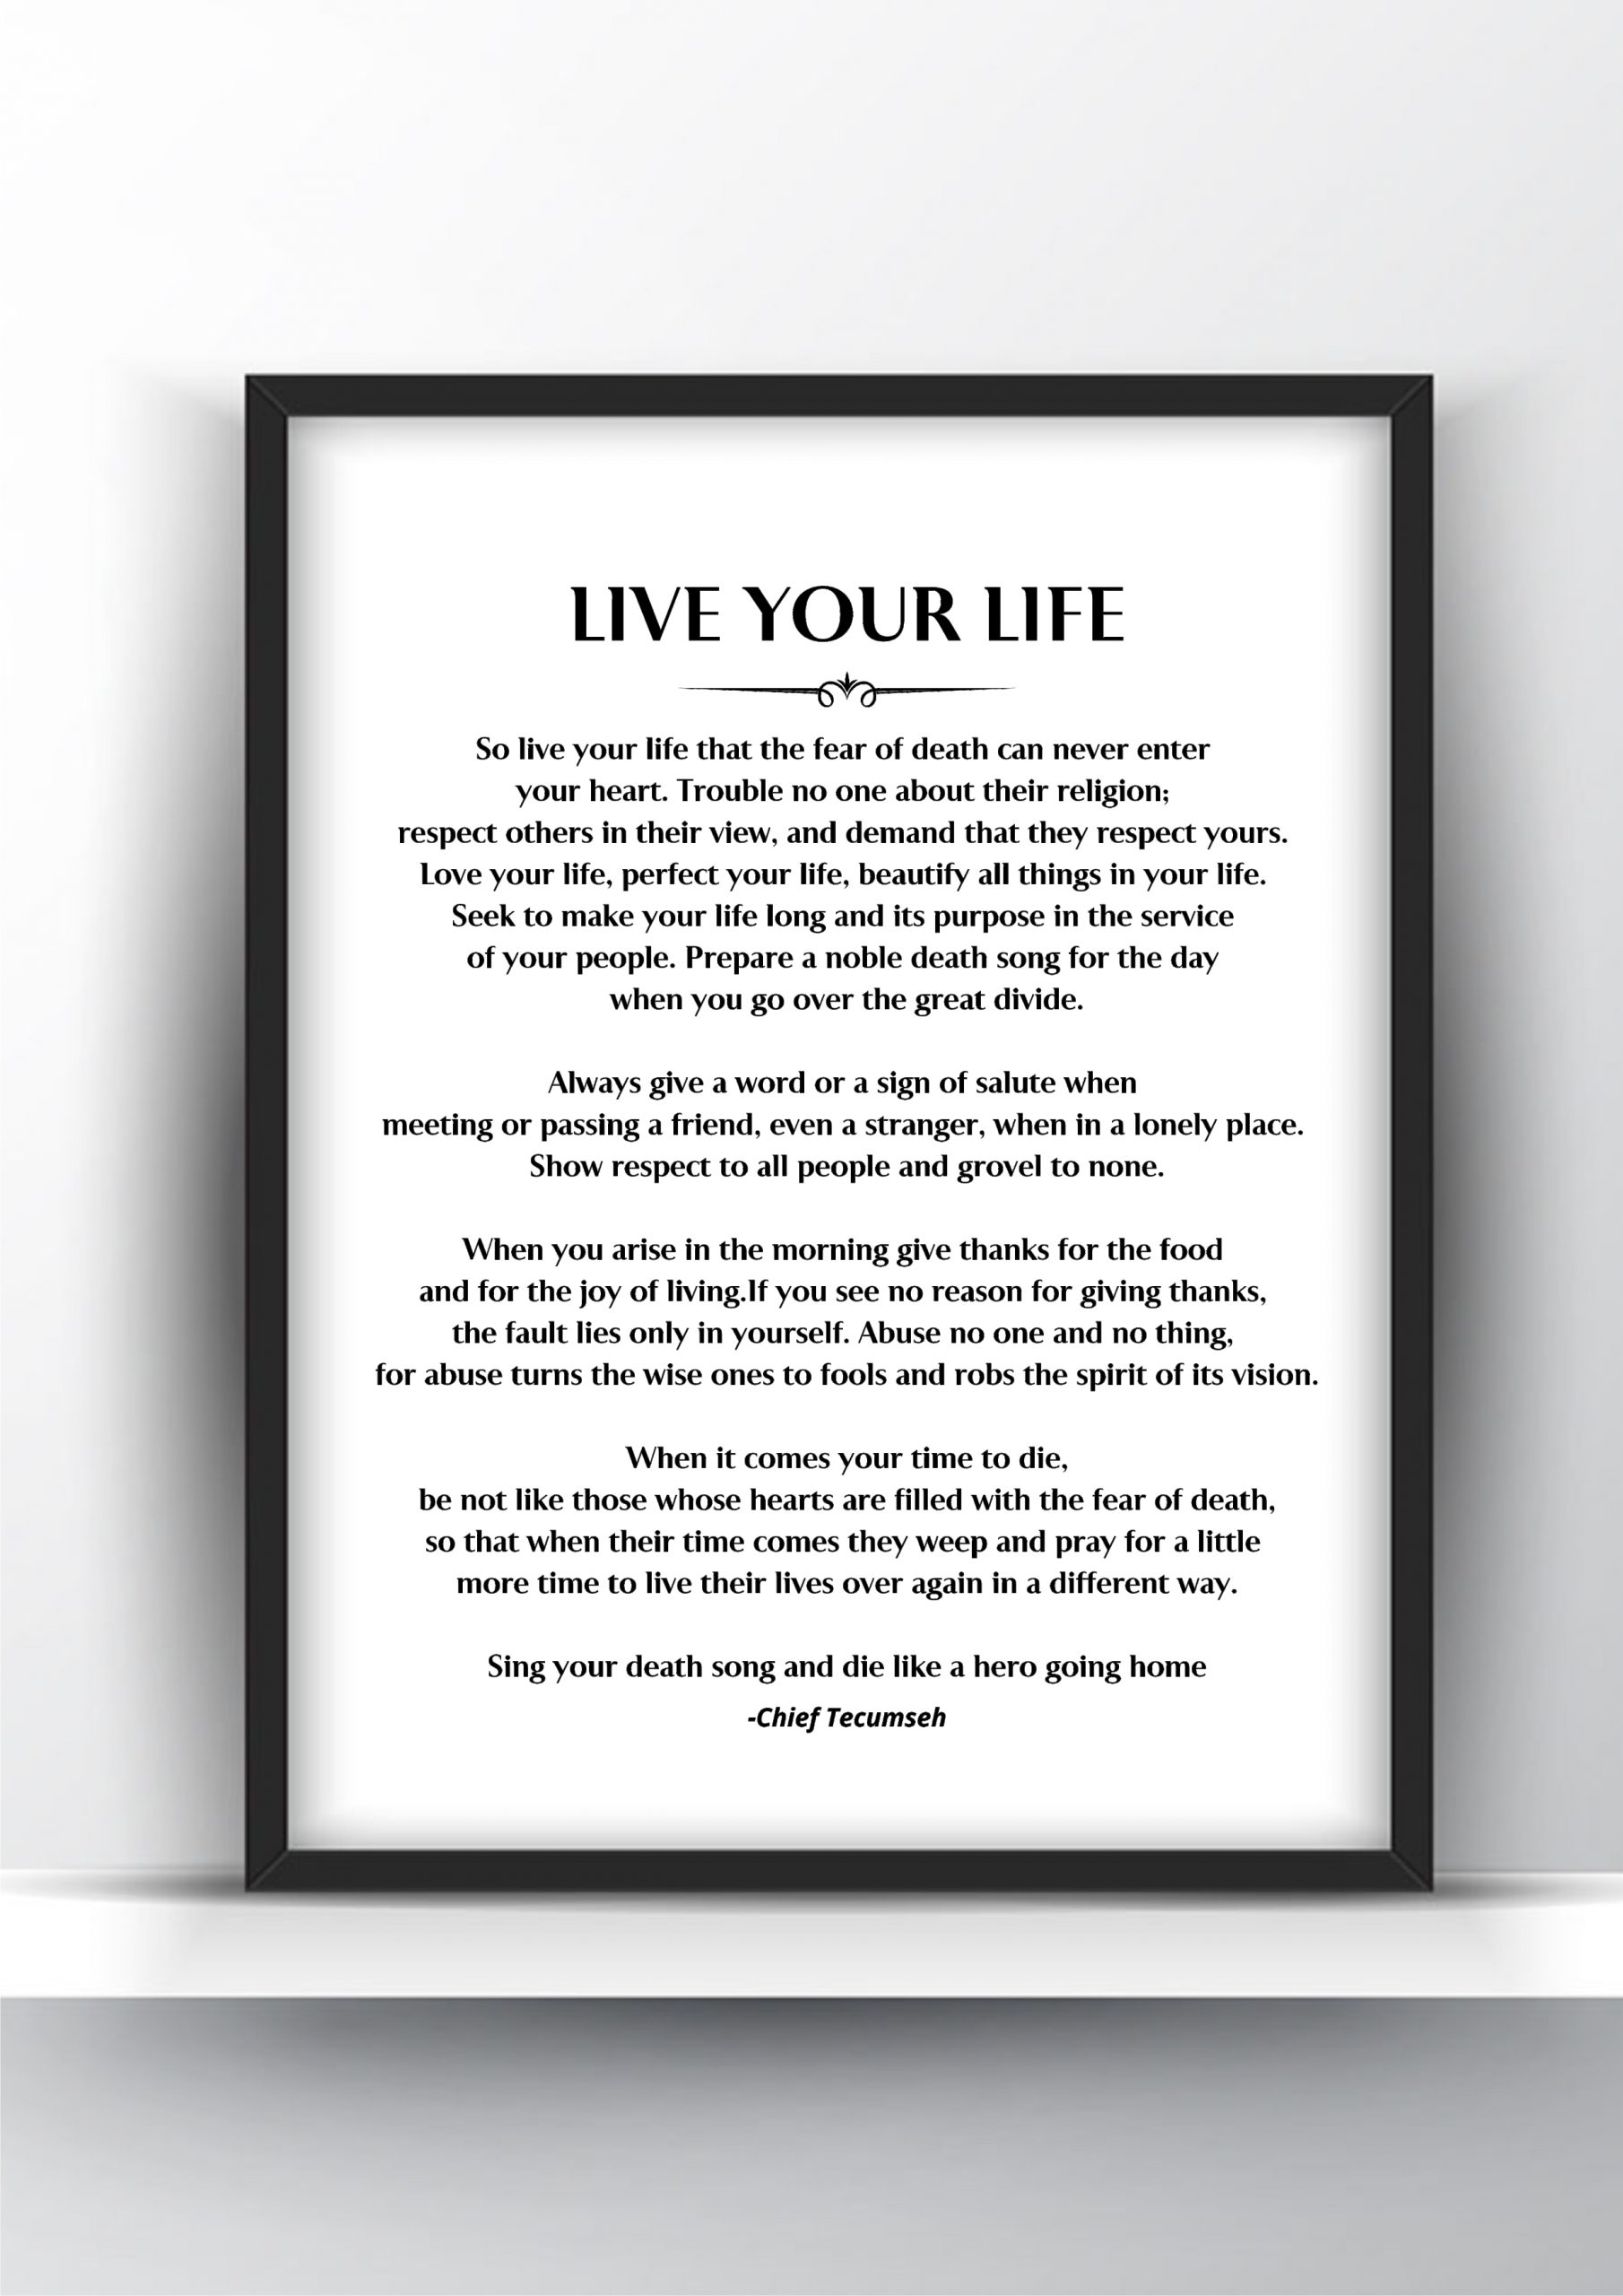 Live Your Life Poem by Chief Tecumseh Printable and Poster